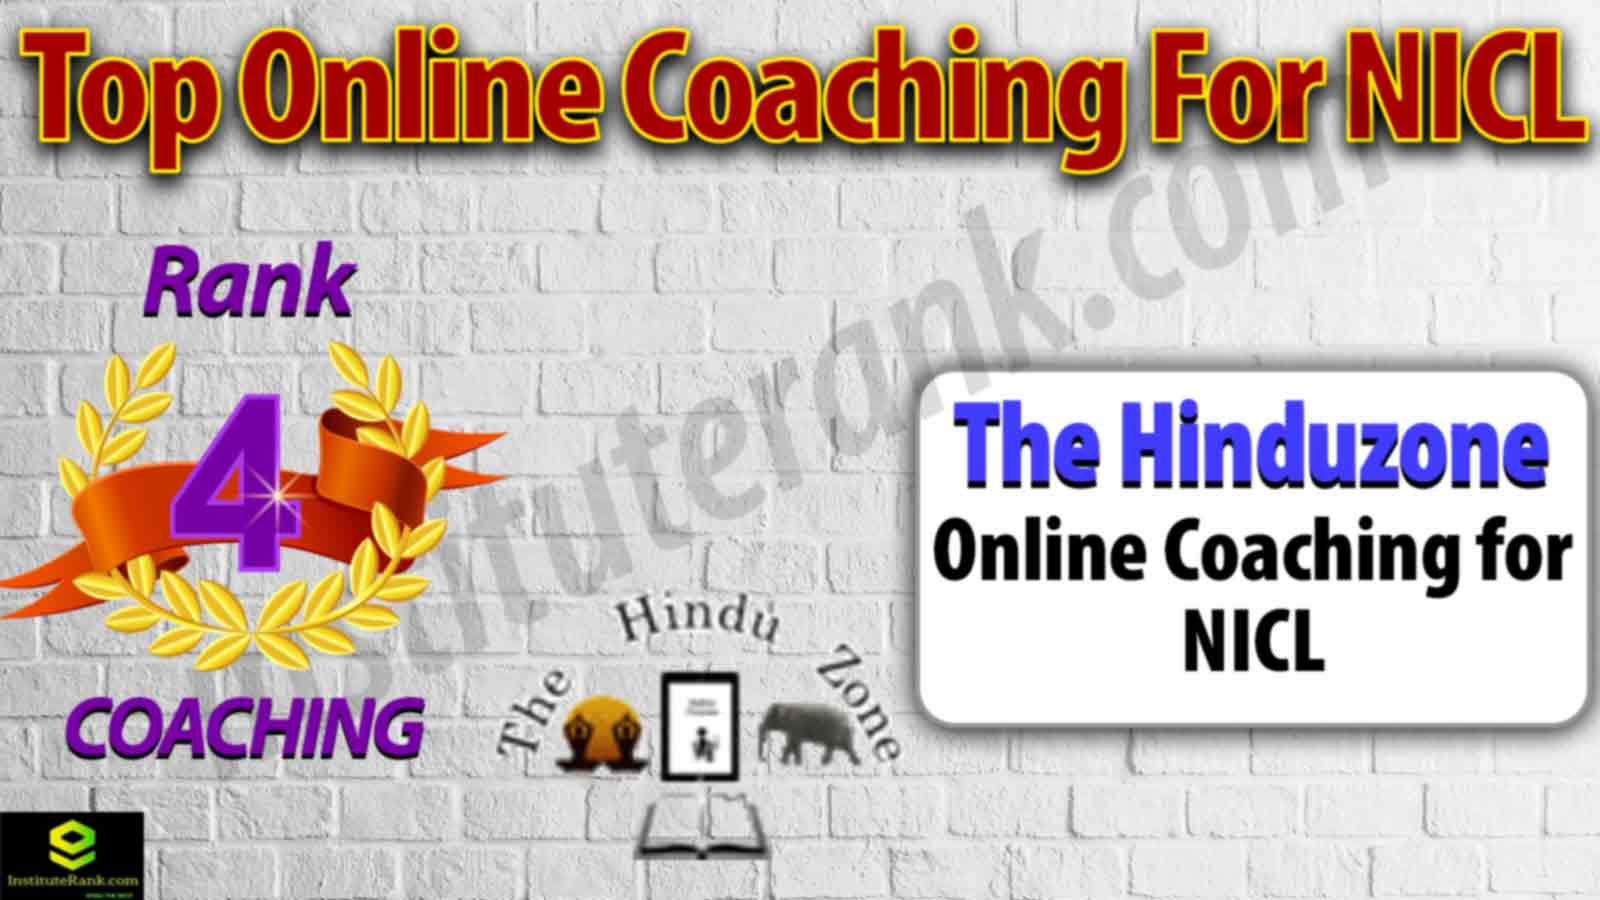 Top Online Coaching Preparation for NICL Examination